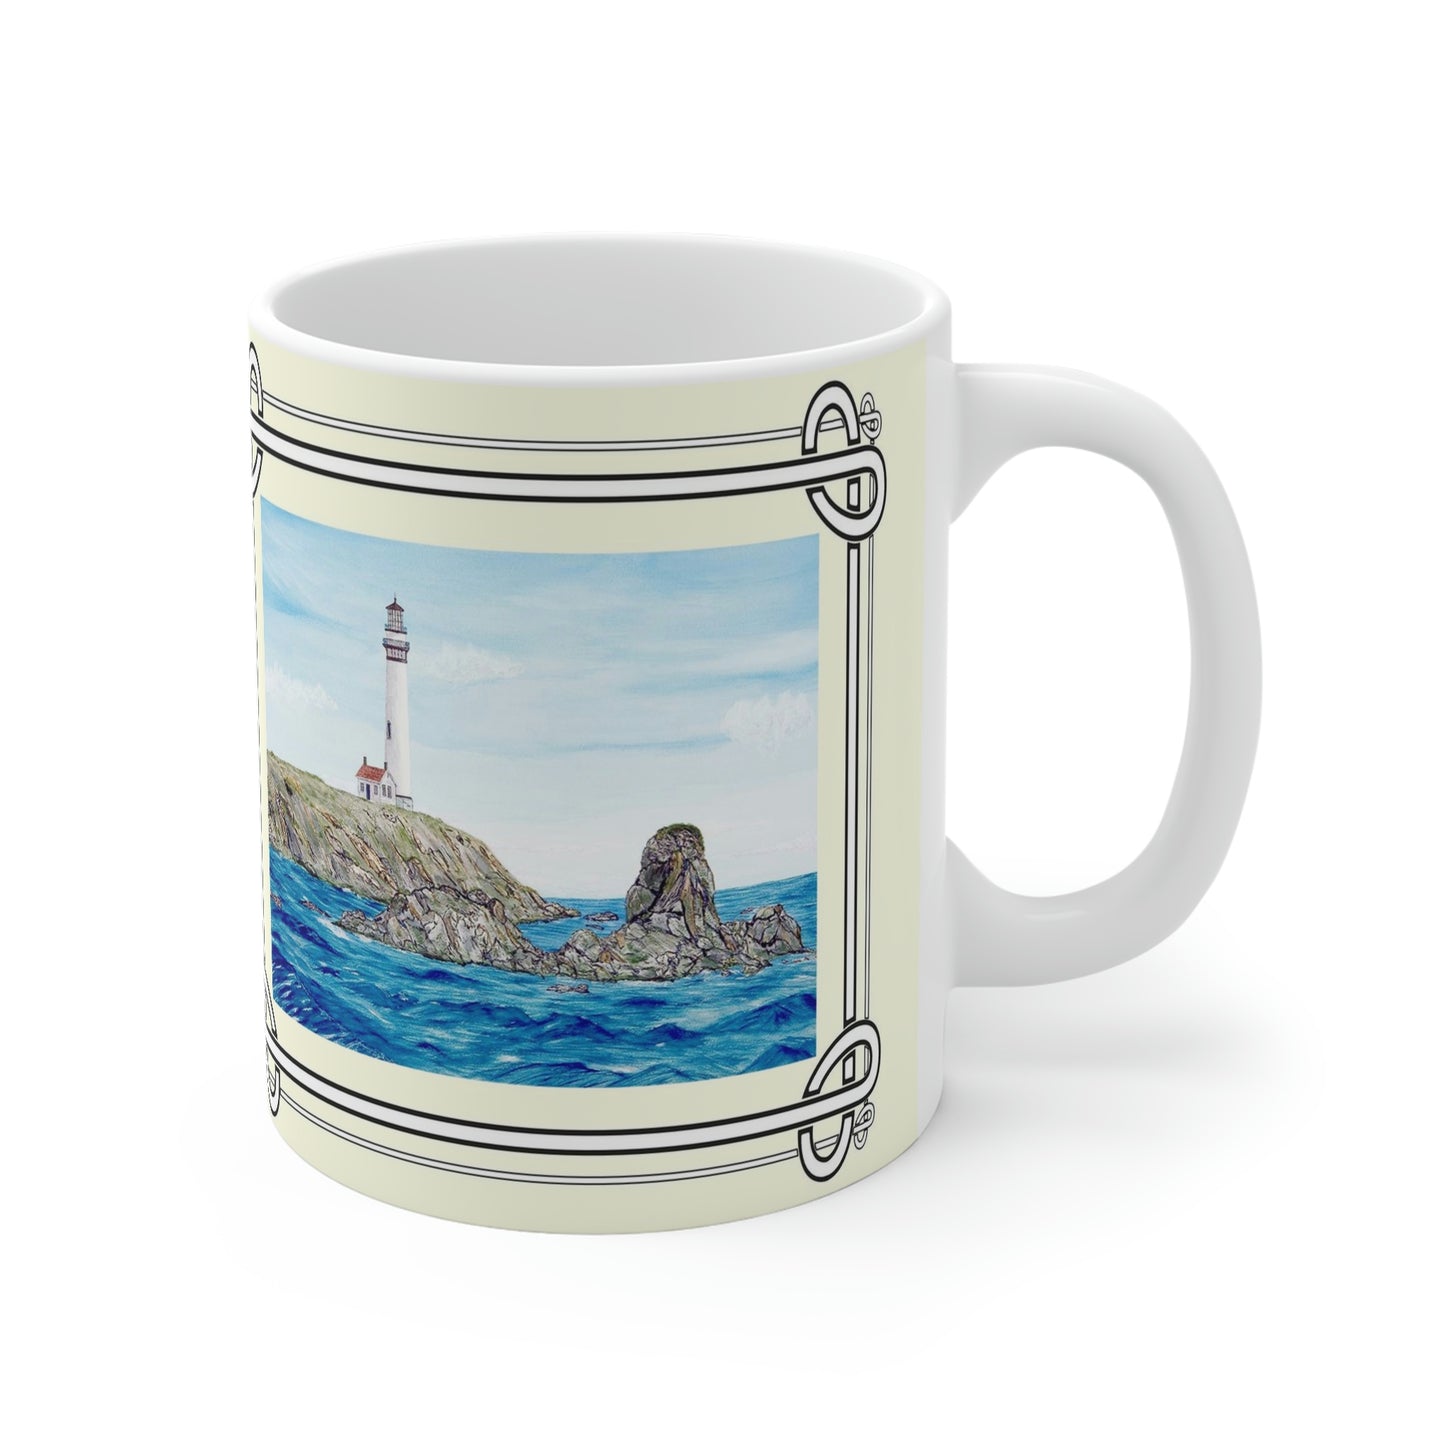 Pigeon Point Lighthouse is 50 miles south of San Francisco in Pescadero, California. On this sparkling sunny day, the lighthouse looks out over the menacing rocks in the Pacific Ocean. At 115 feet, the lighthouse is the tallest on the West Coast of the USA. It is an active aid to navigation. This unique lighthouse mug makes a perfect gift!   The mug design is a reproduction of an original watercolor by Lee M. Buchanan and has the image on the front and back of the mug.